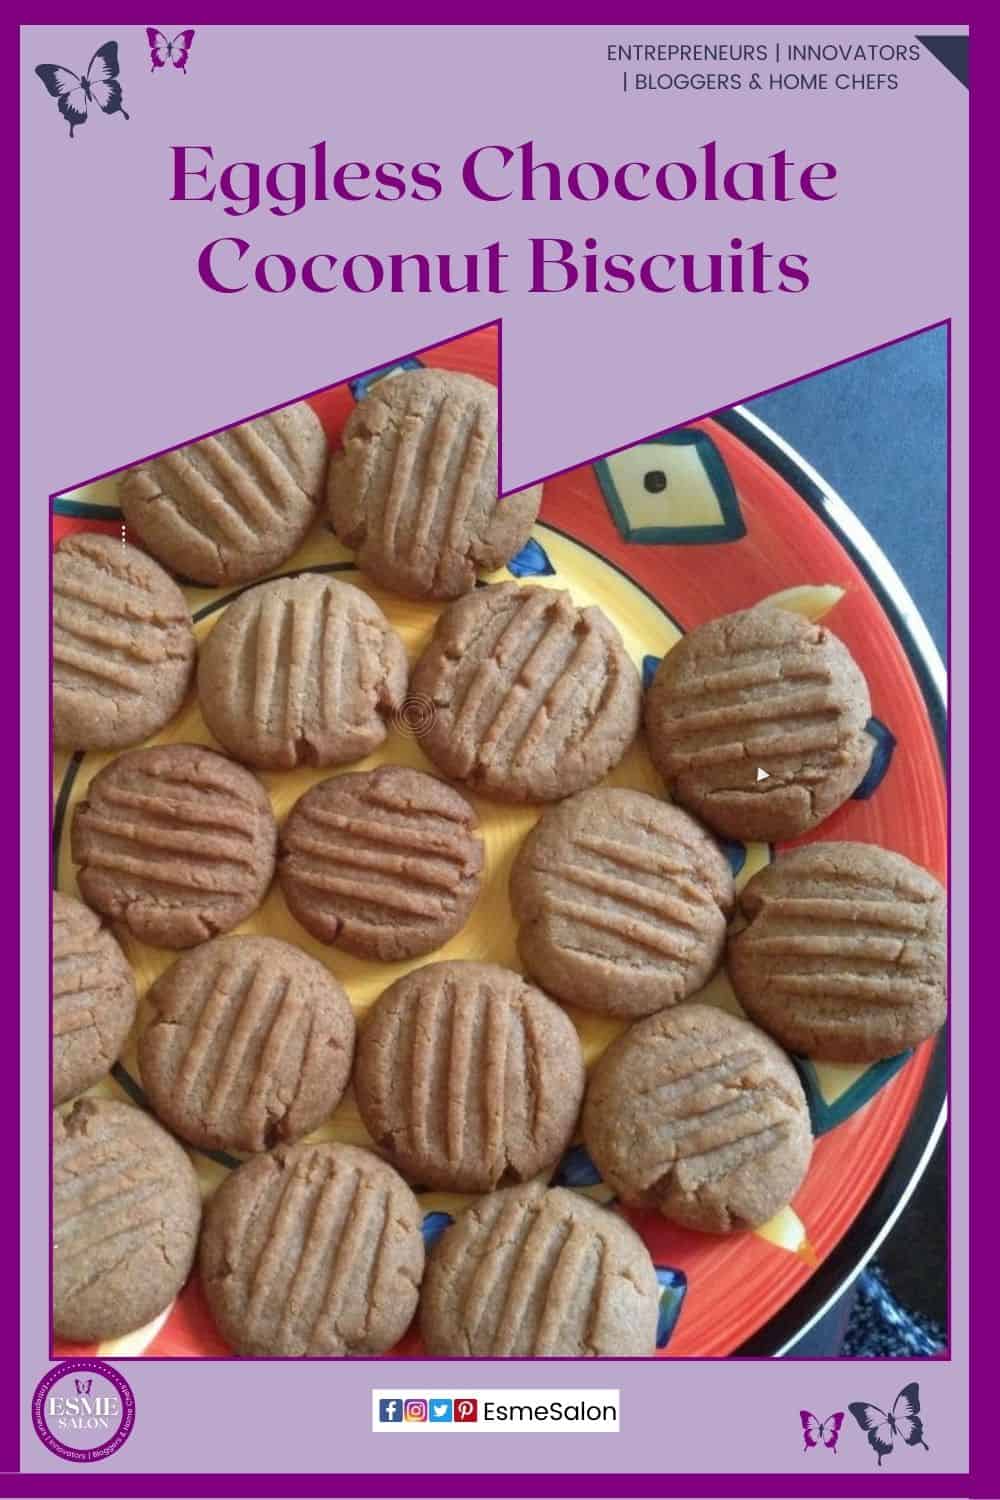 an image of Round and slightly flattened Eggless Chocolate Coconut Biscuits